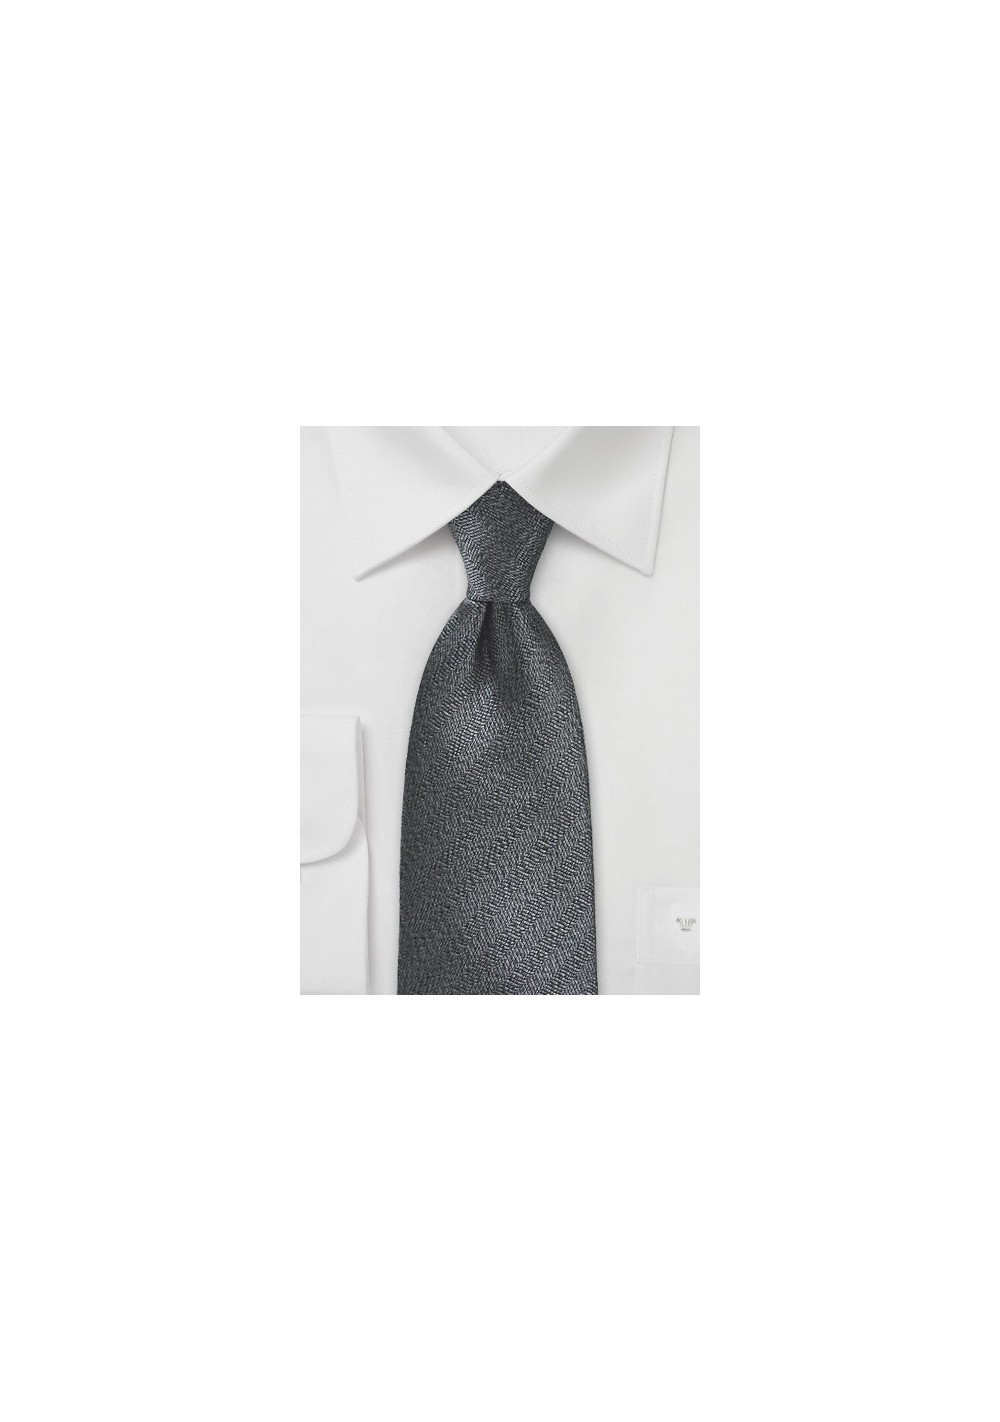 Textured Tie in Black and Pewter